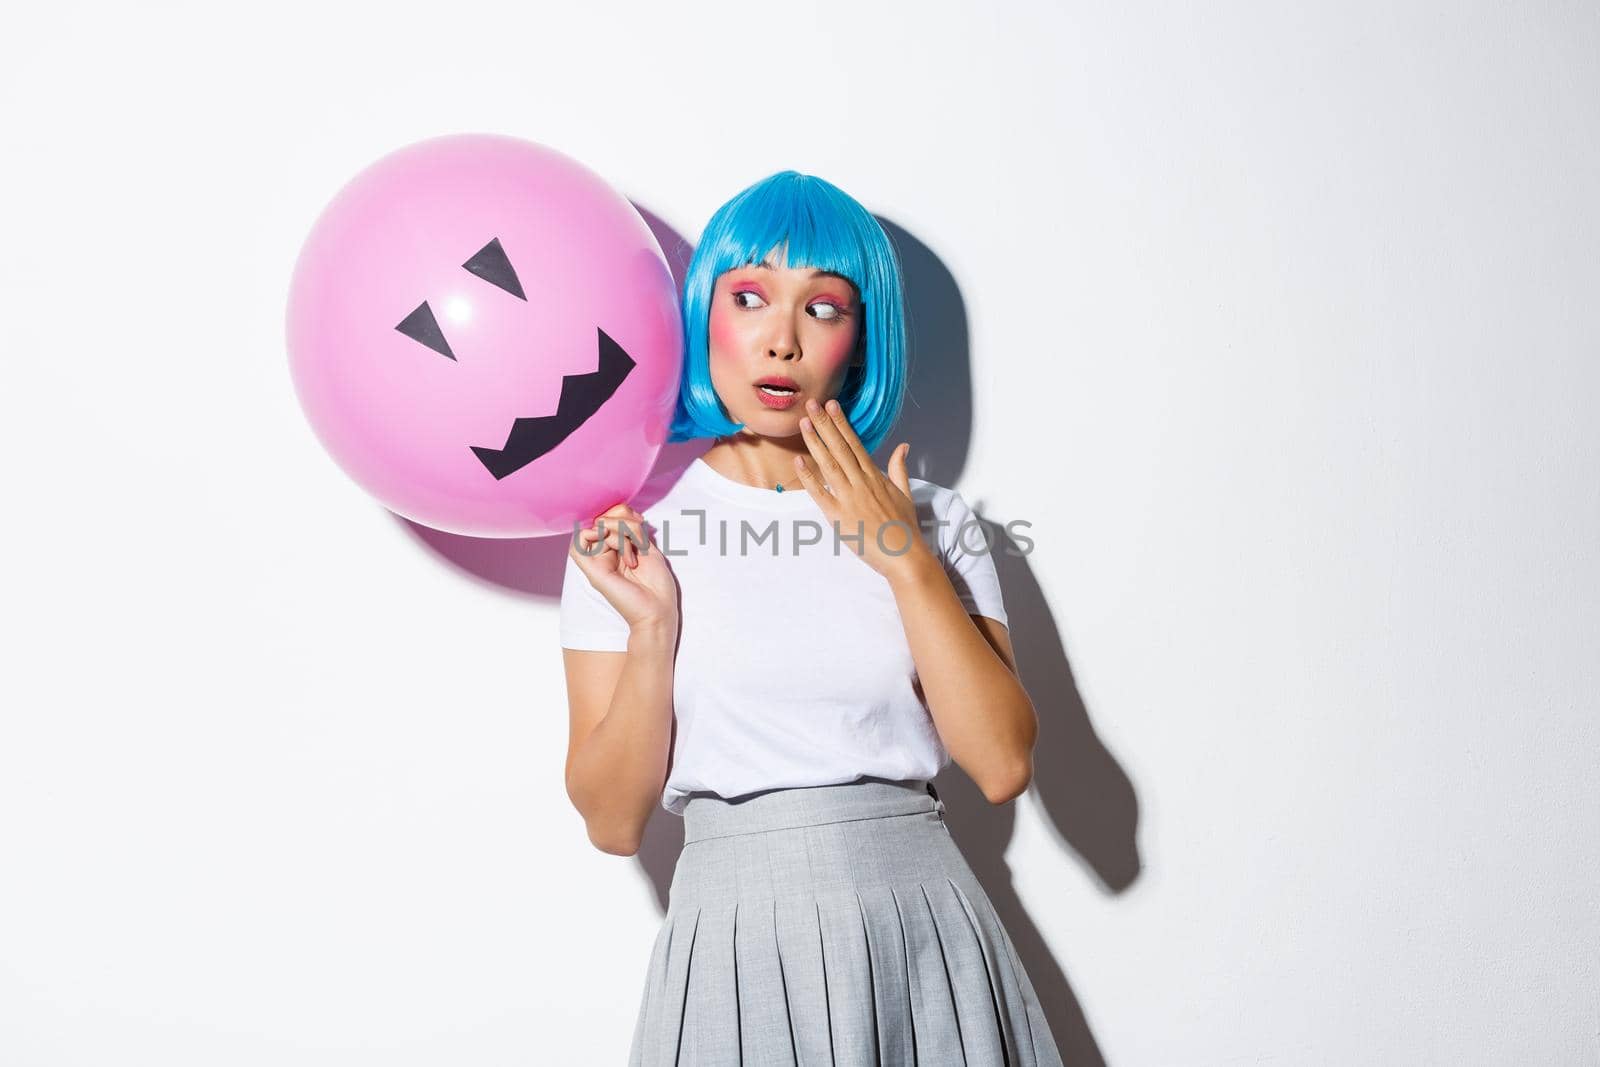 Cute and silly asian girl in blue wig, celebrating halloween, looking surprised at balloon with scary face.